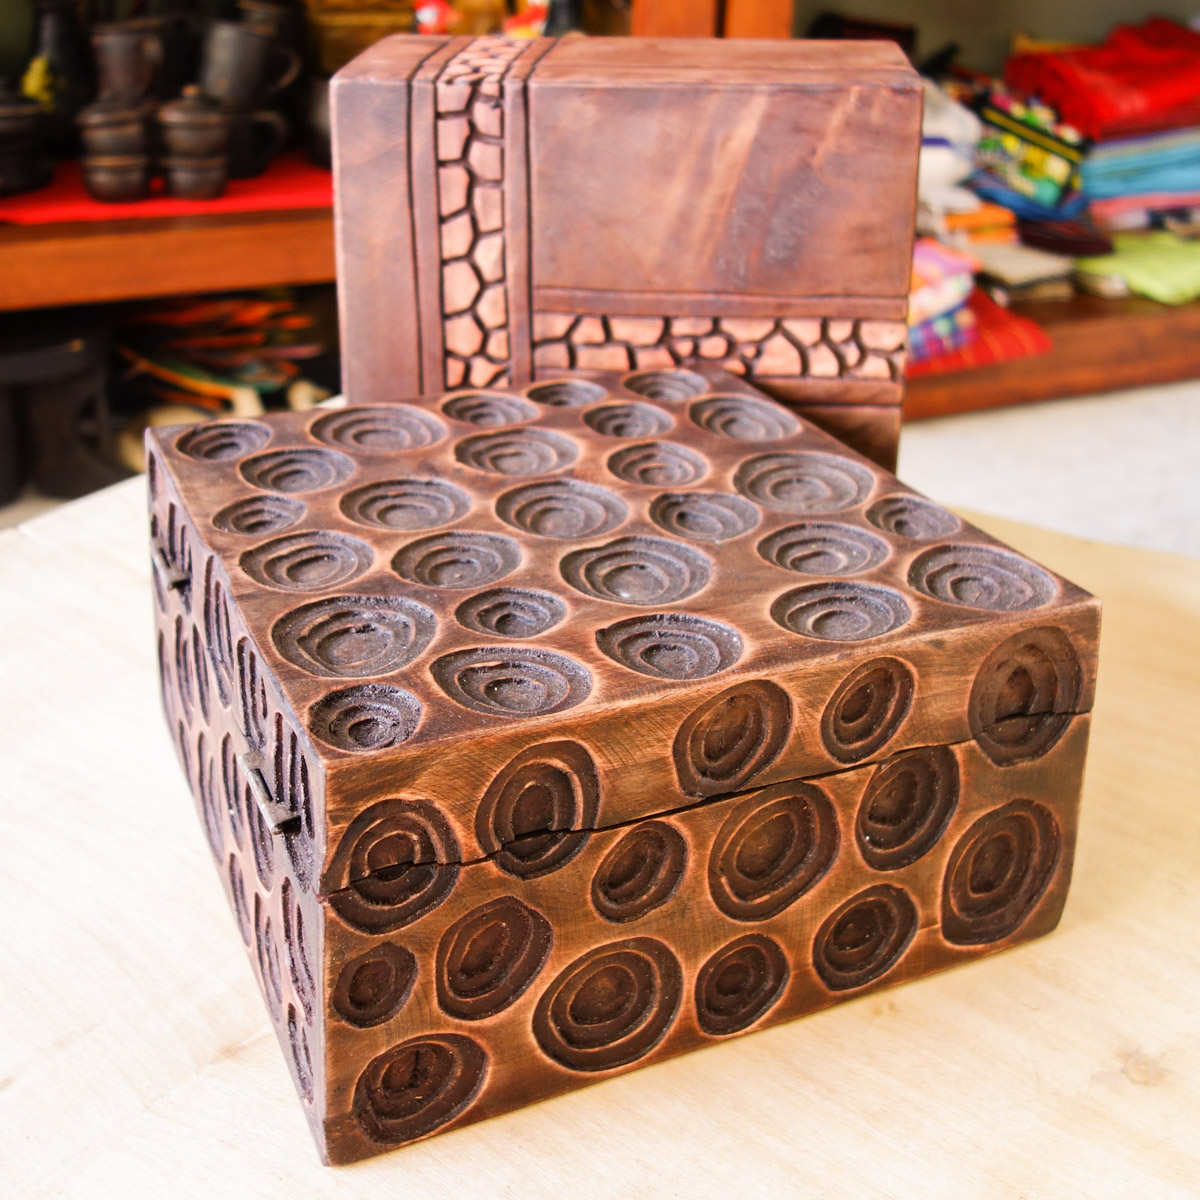 Decorative carved wooden boxes - Goodie's African ...